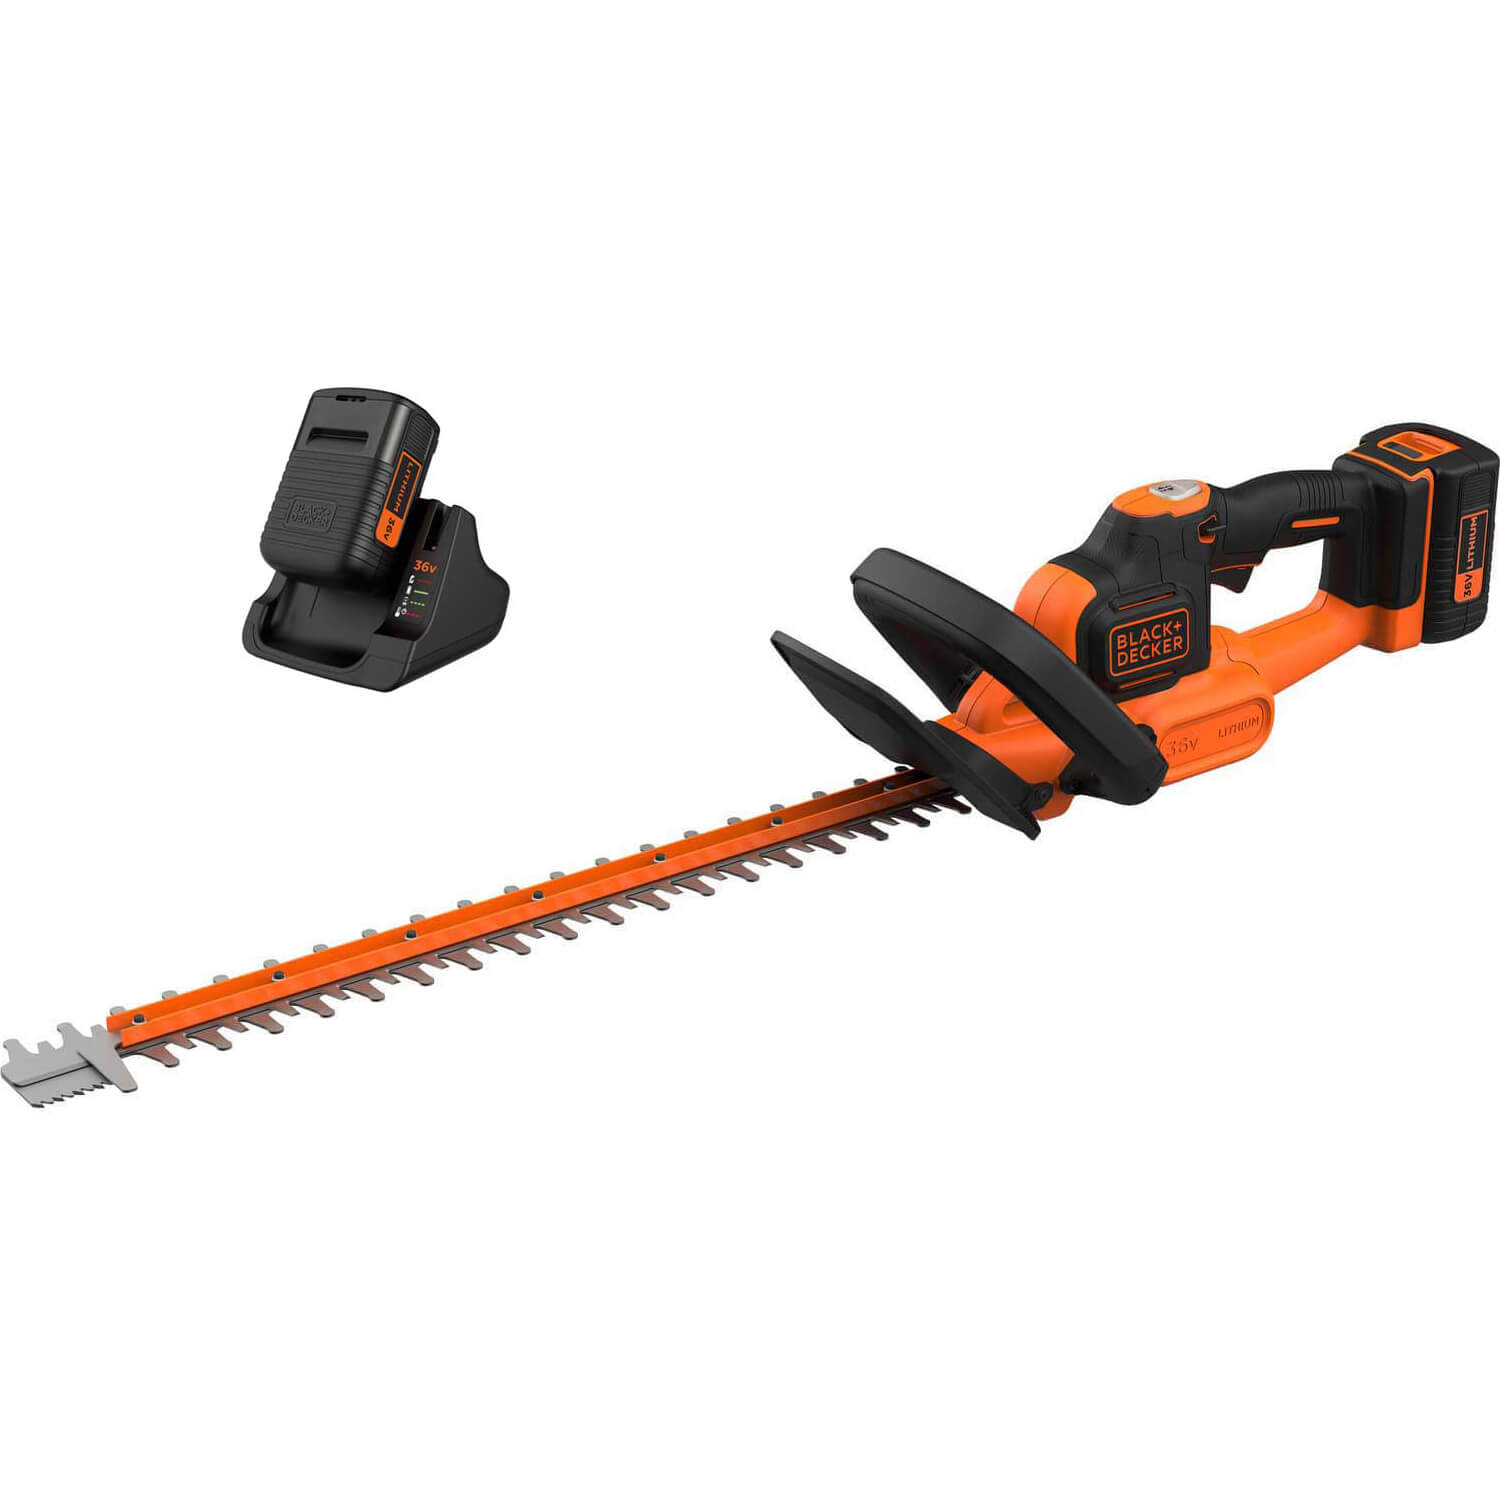 Image of Black and Decker BCHTS3620 36v Cordless Hedge Trimmer 550mm 2 x 2ah Li-ion Charger